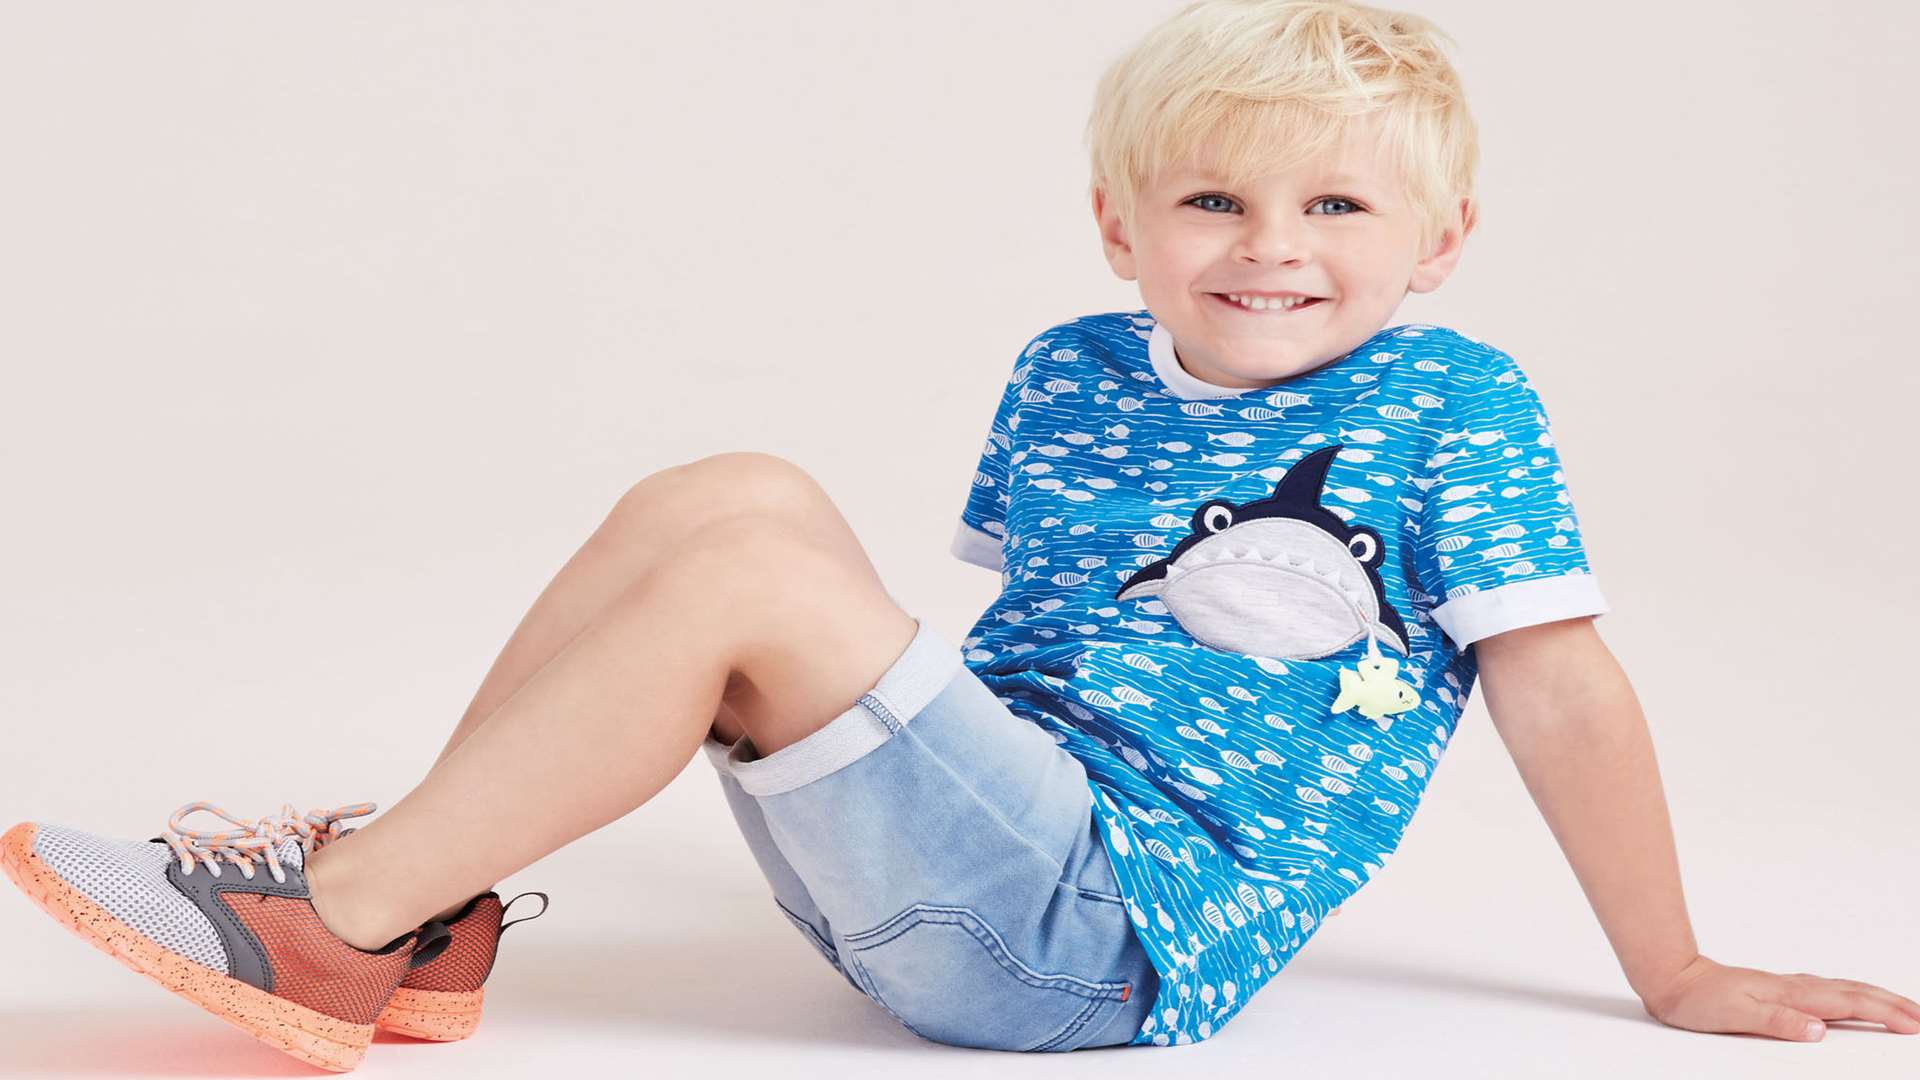 Morrisons' kidswear range, Nutmeg, is really well priced, and their shark tee is utterly adorable. T-shirt, age 1-6 years, from £4.50, and soft denim Shorts, age 1-6 years, £6 - in store only